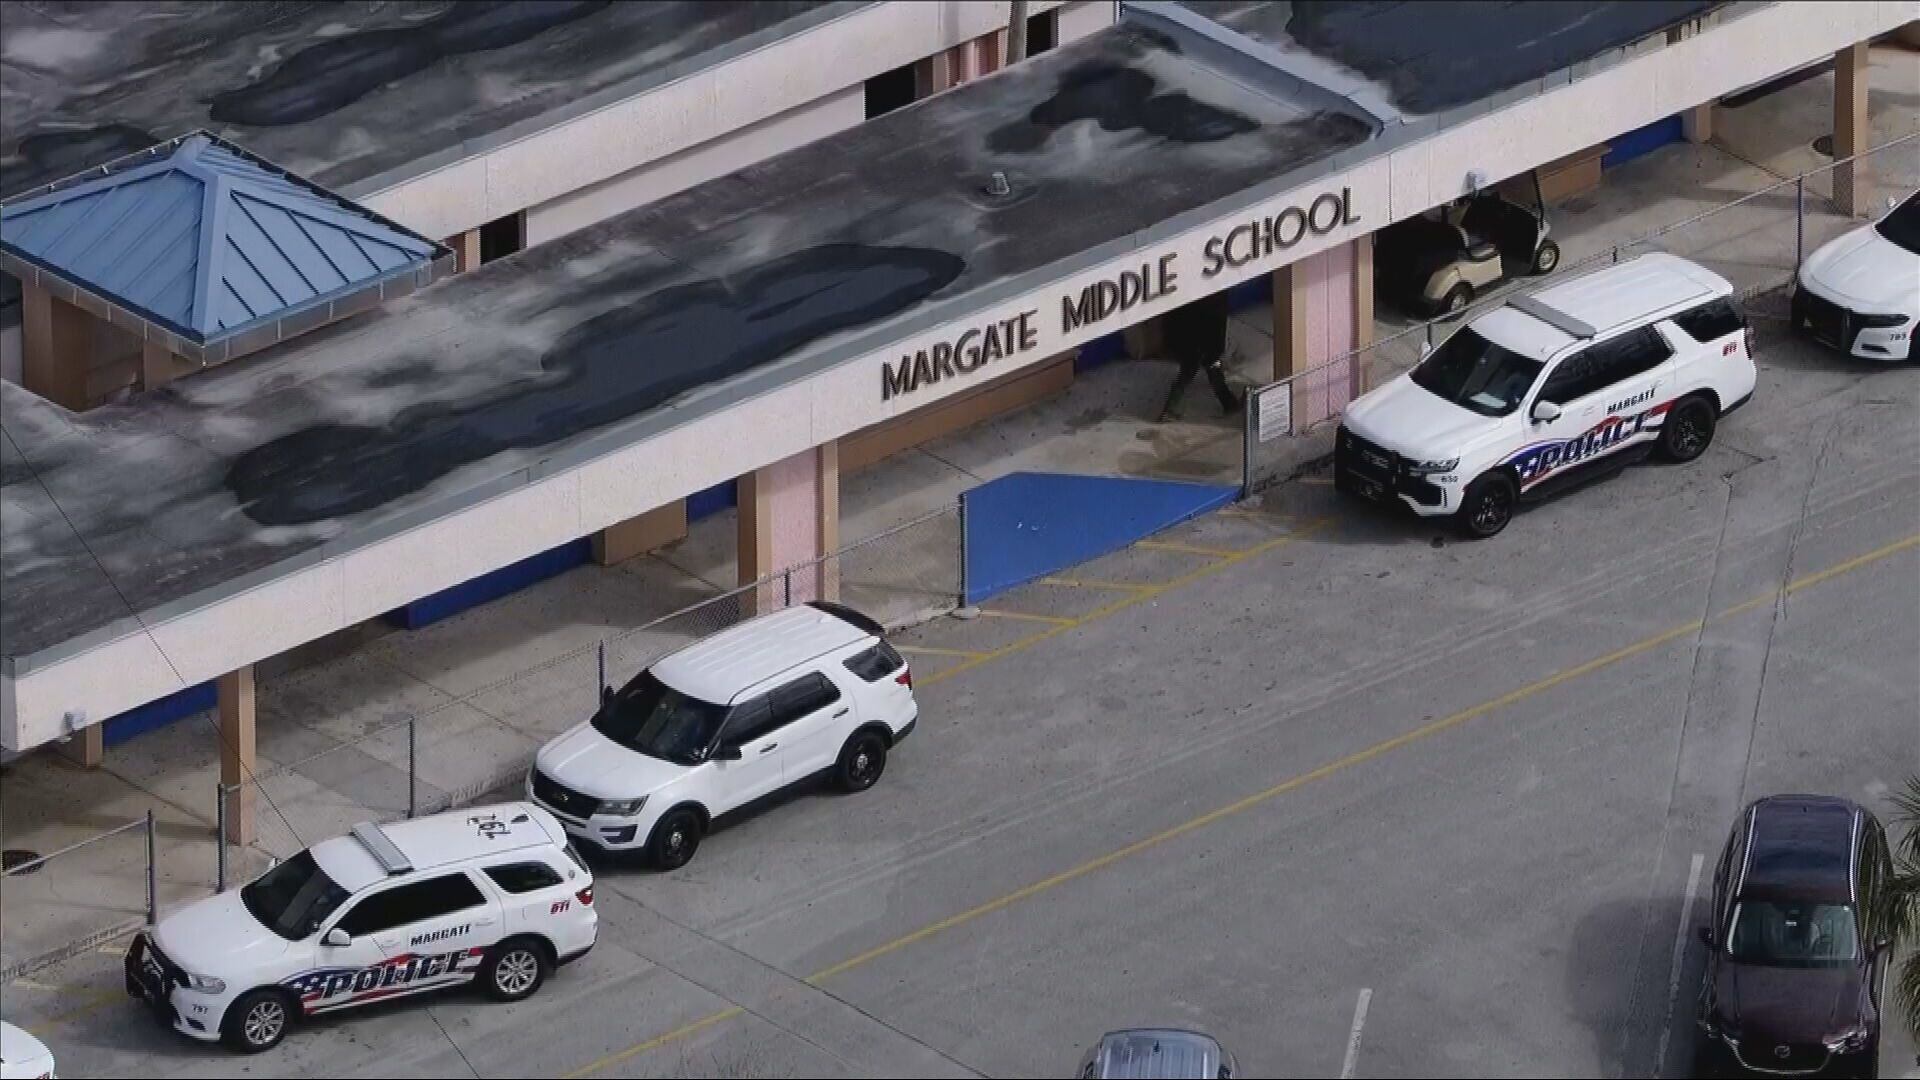 Margate Middle School was on lockdown on Monday afternoon, police said.